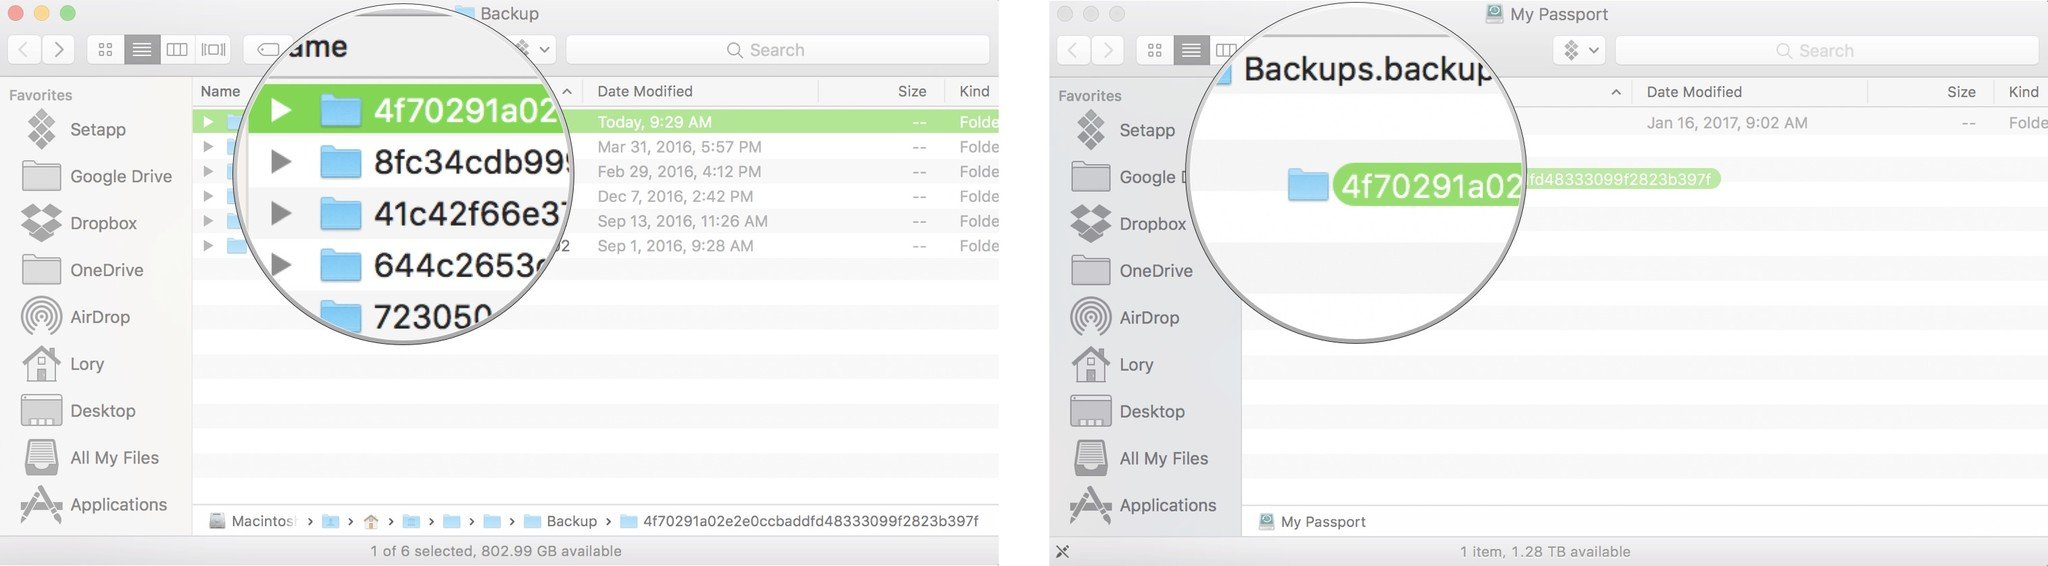 Move iPhone or iPad backups to external hard drive by showing Click on the iPhone backup, then drag it to your external hard drive